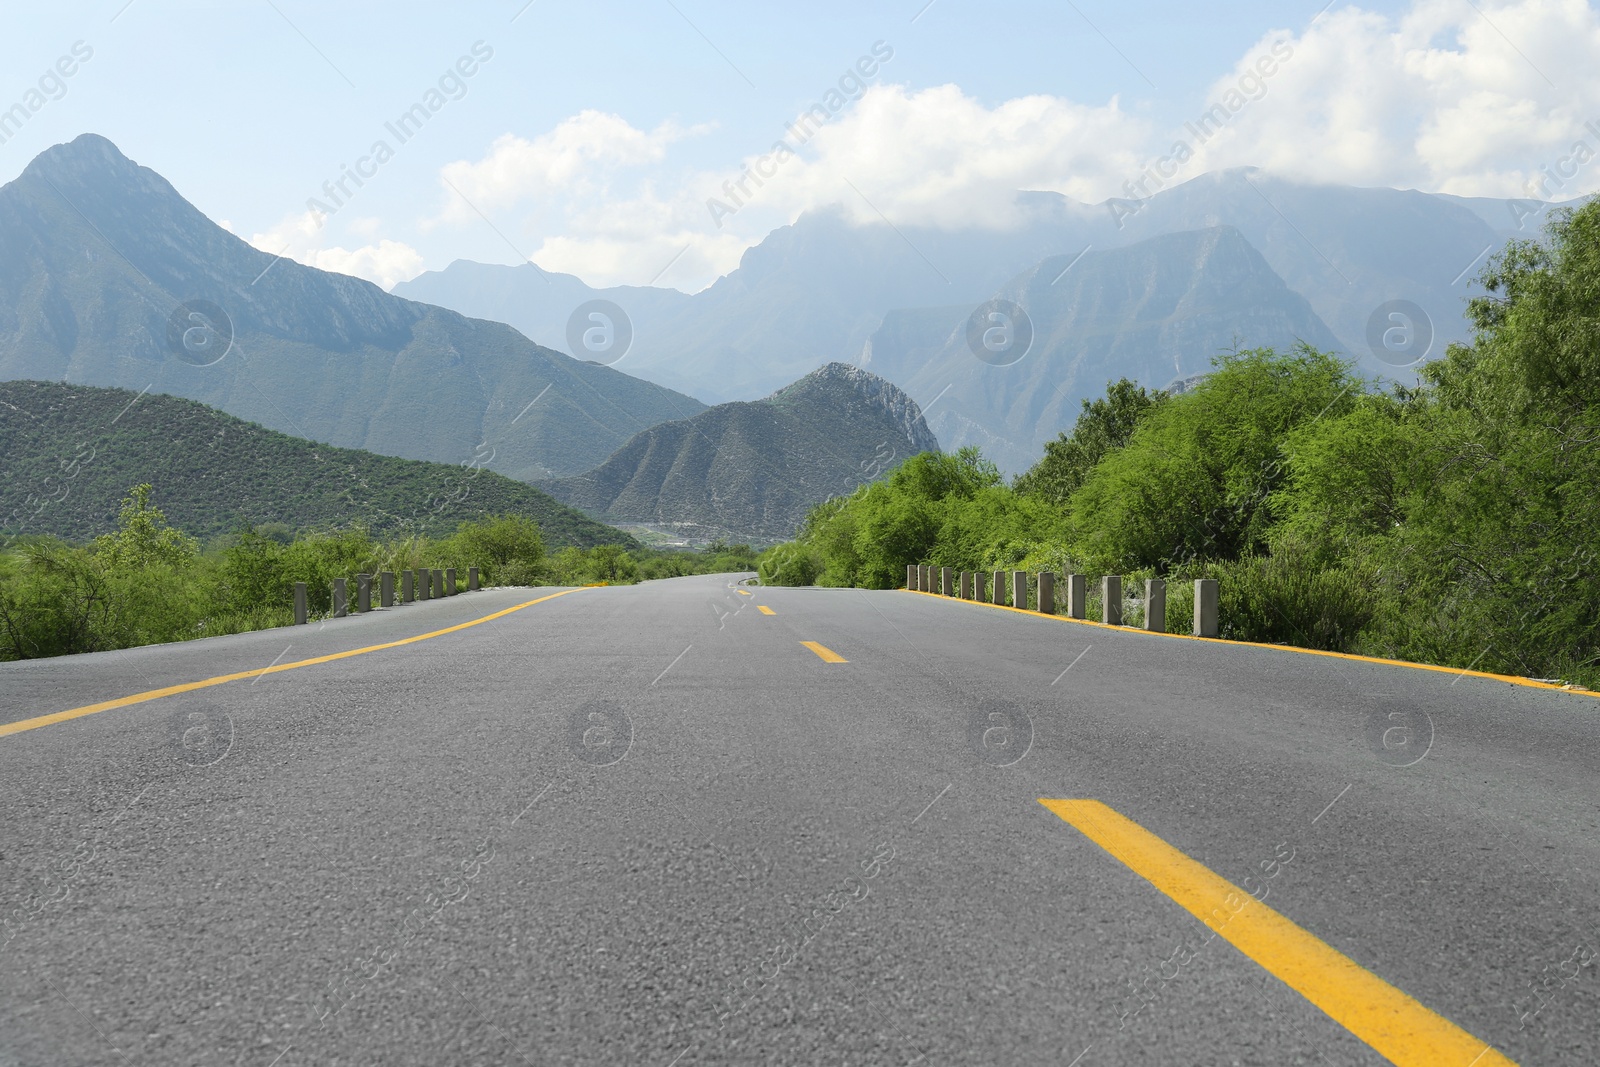 Photo of Picturesque view of big mountains and bushes near road under cloudy sky